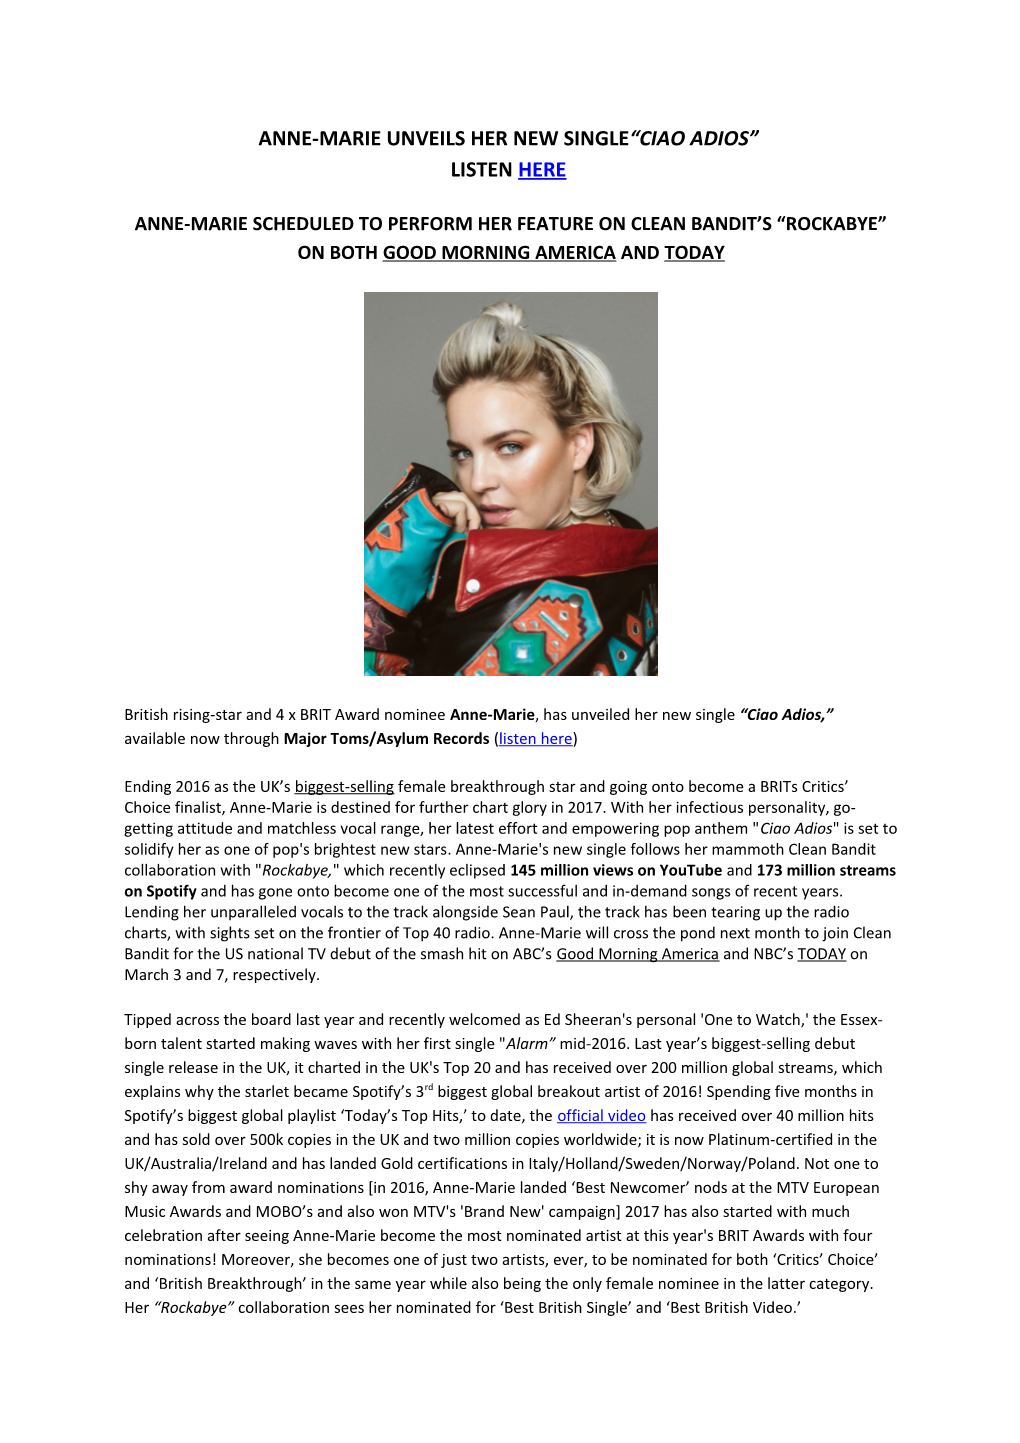 Anne-Marie Unveils Her New Single Ciao Adios Listen Here